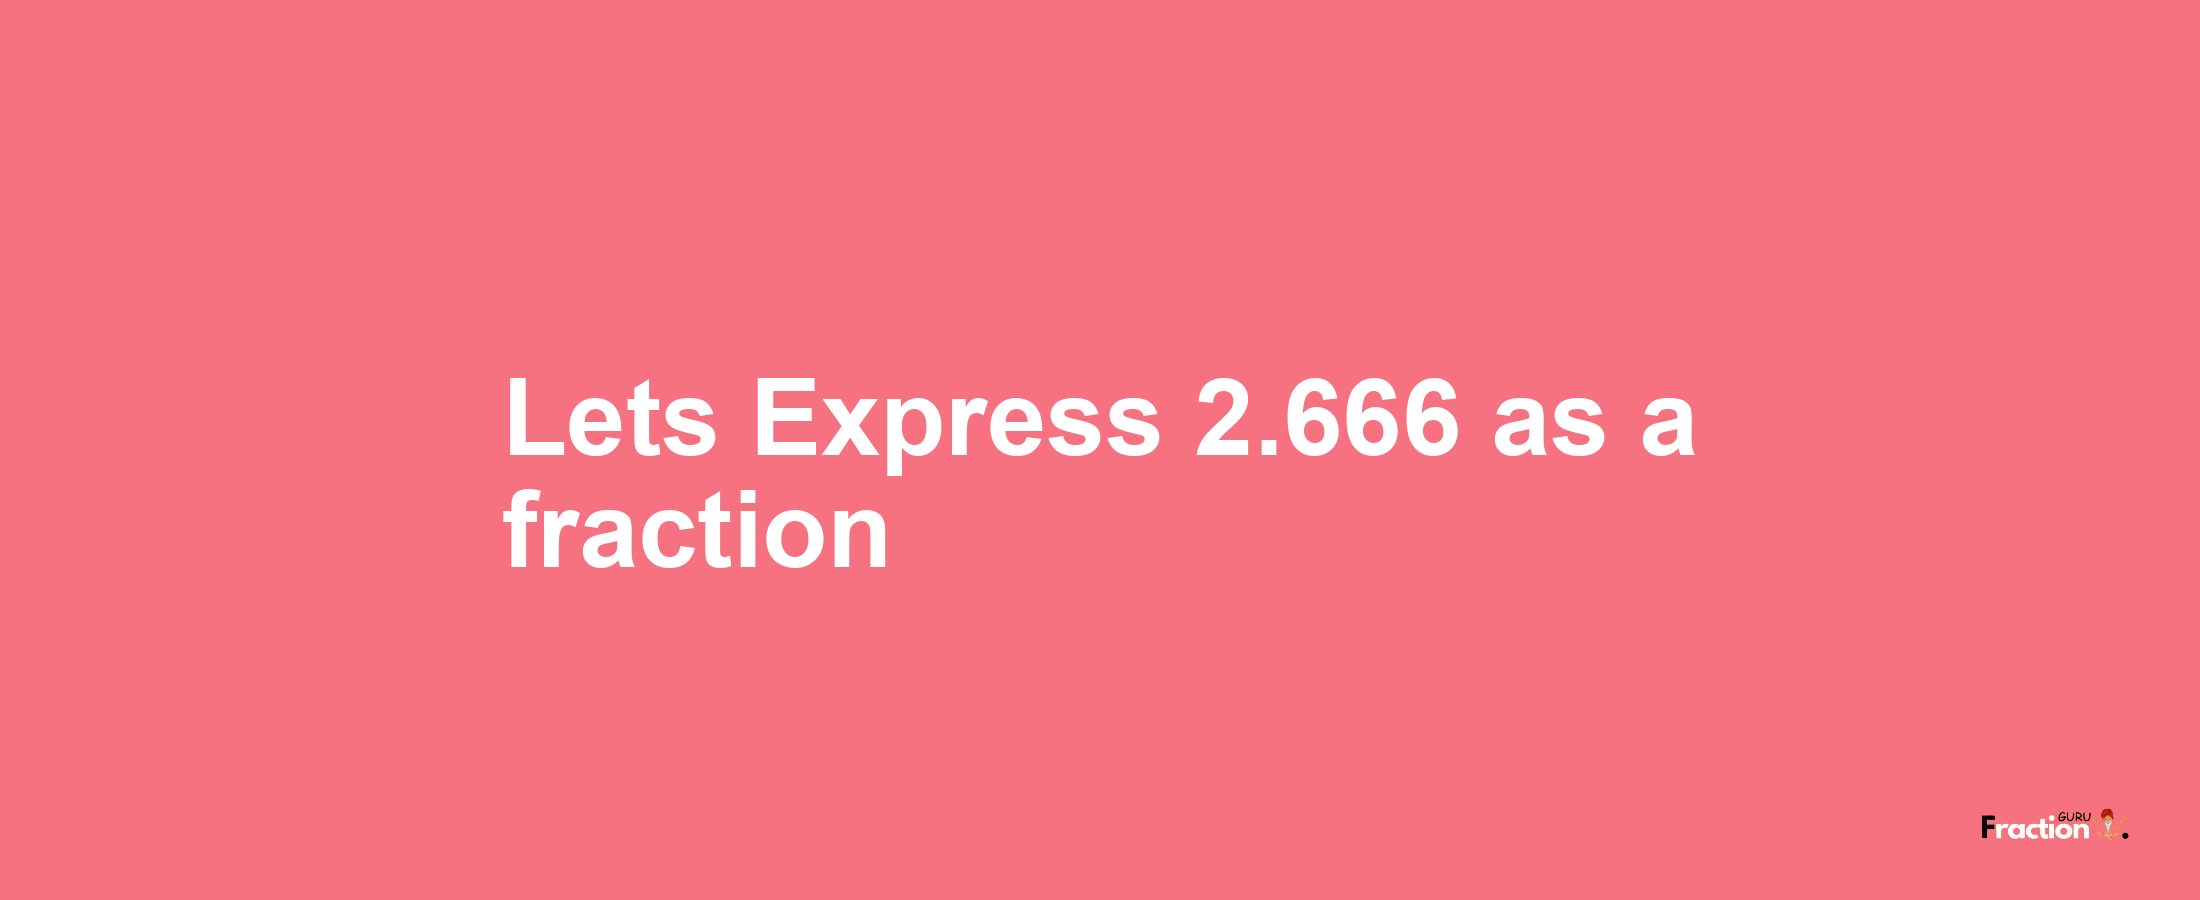 Lets Express 2.666 as afraction